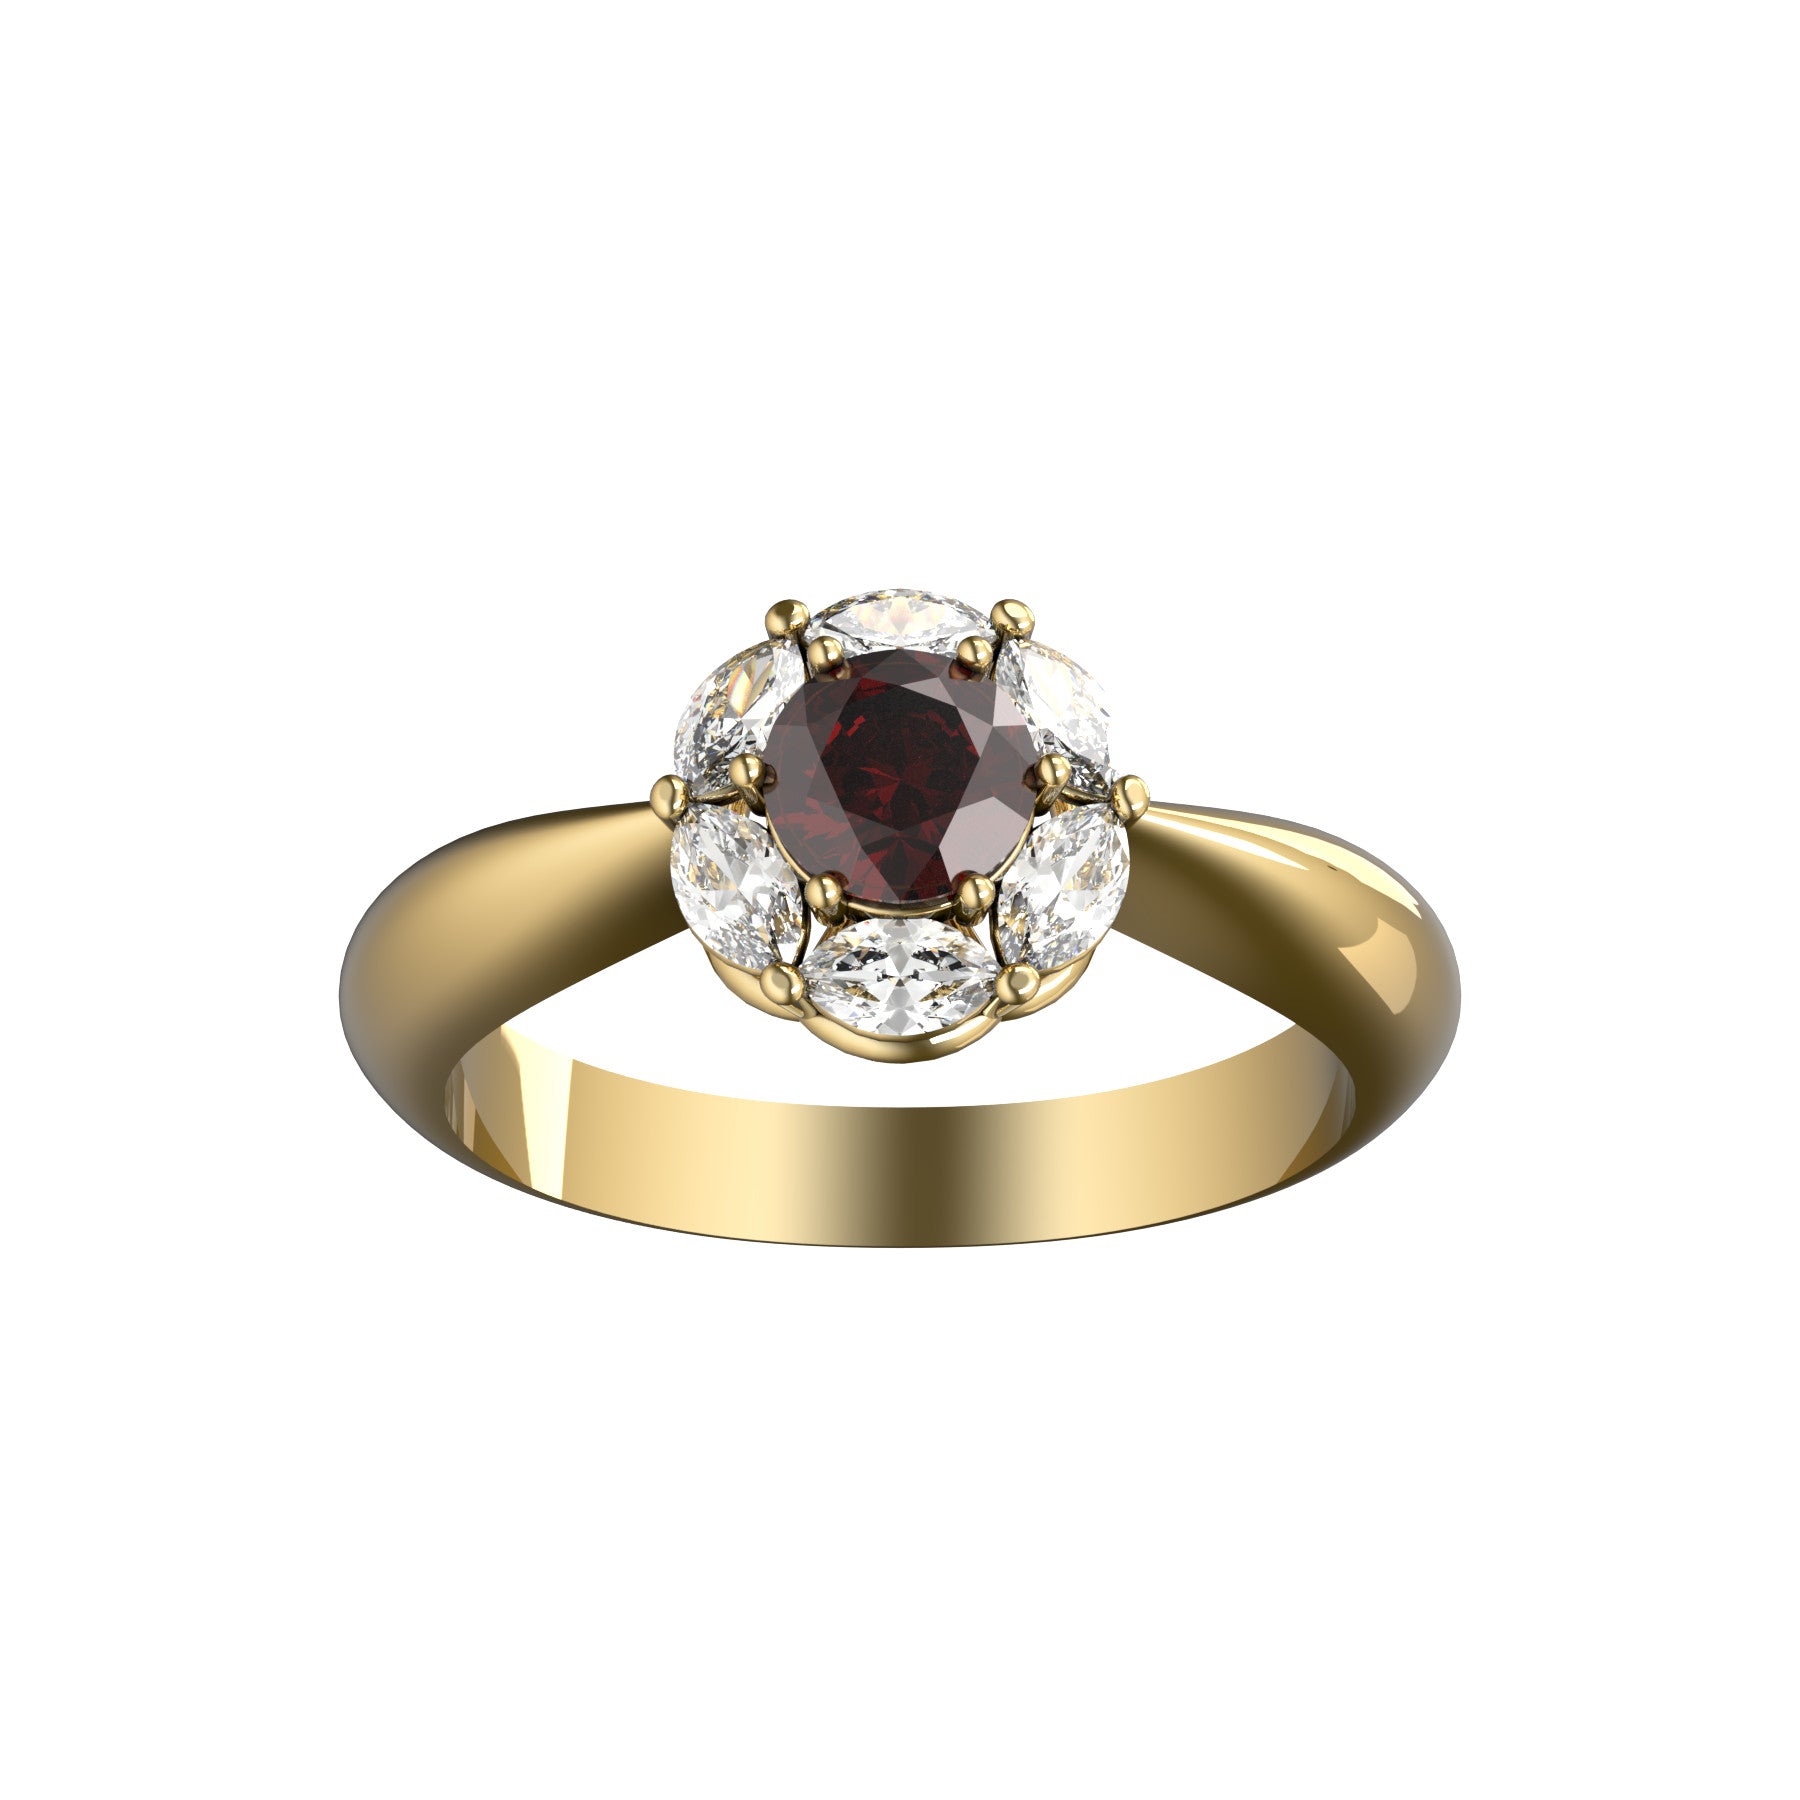 deep love ring, 18 K yellow gold, about 0,34 ct round natural ruby, navette natural diamonds, weight about 3,2 g. (0.11 oz), width 7,8 mm max